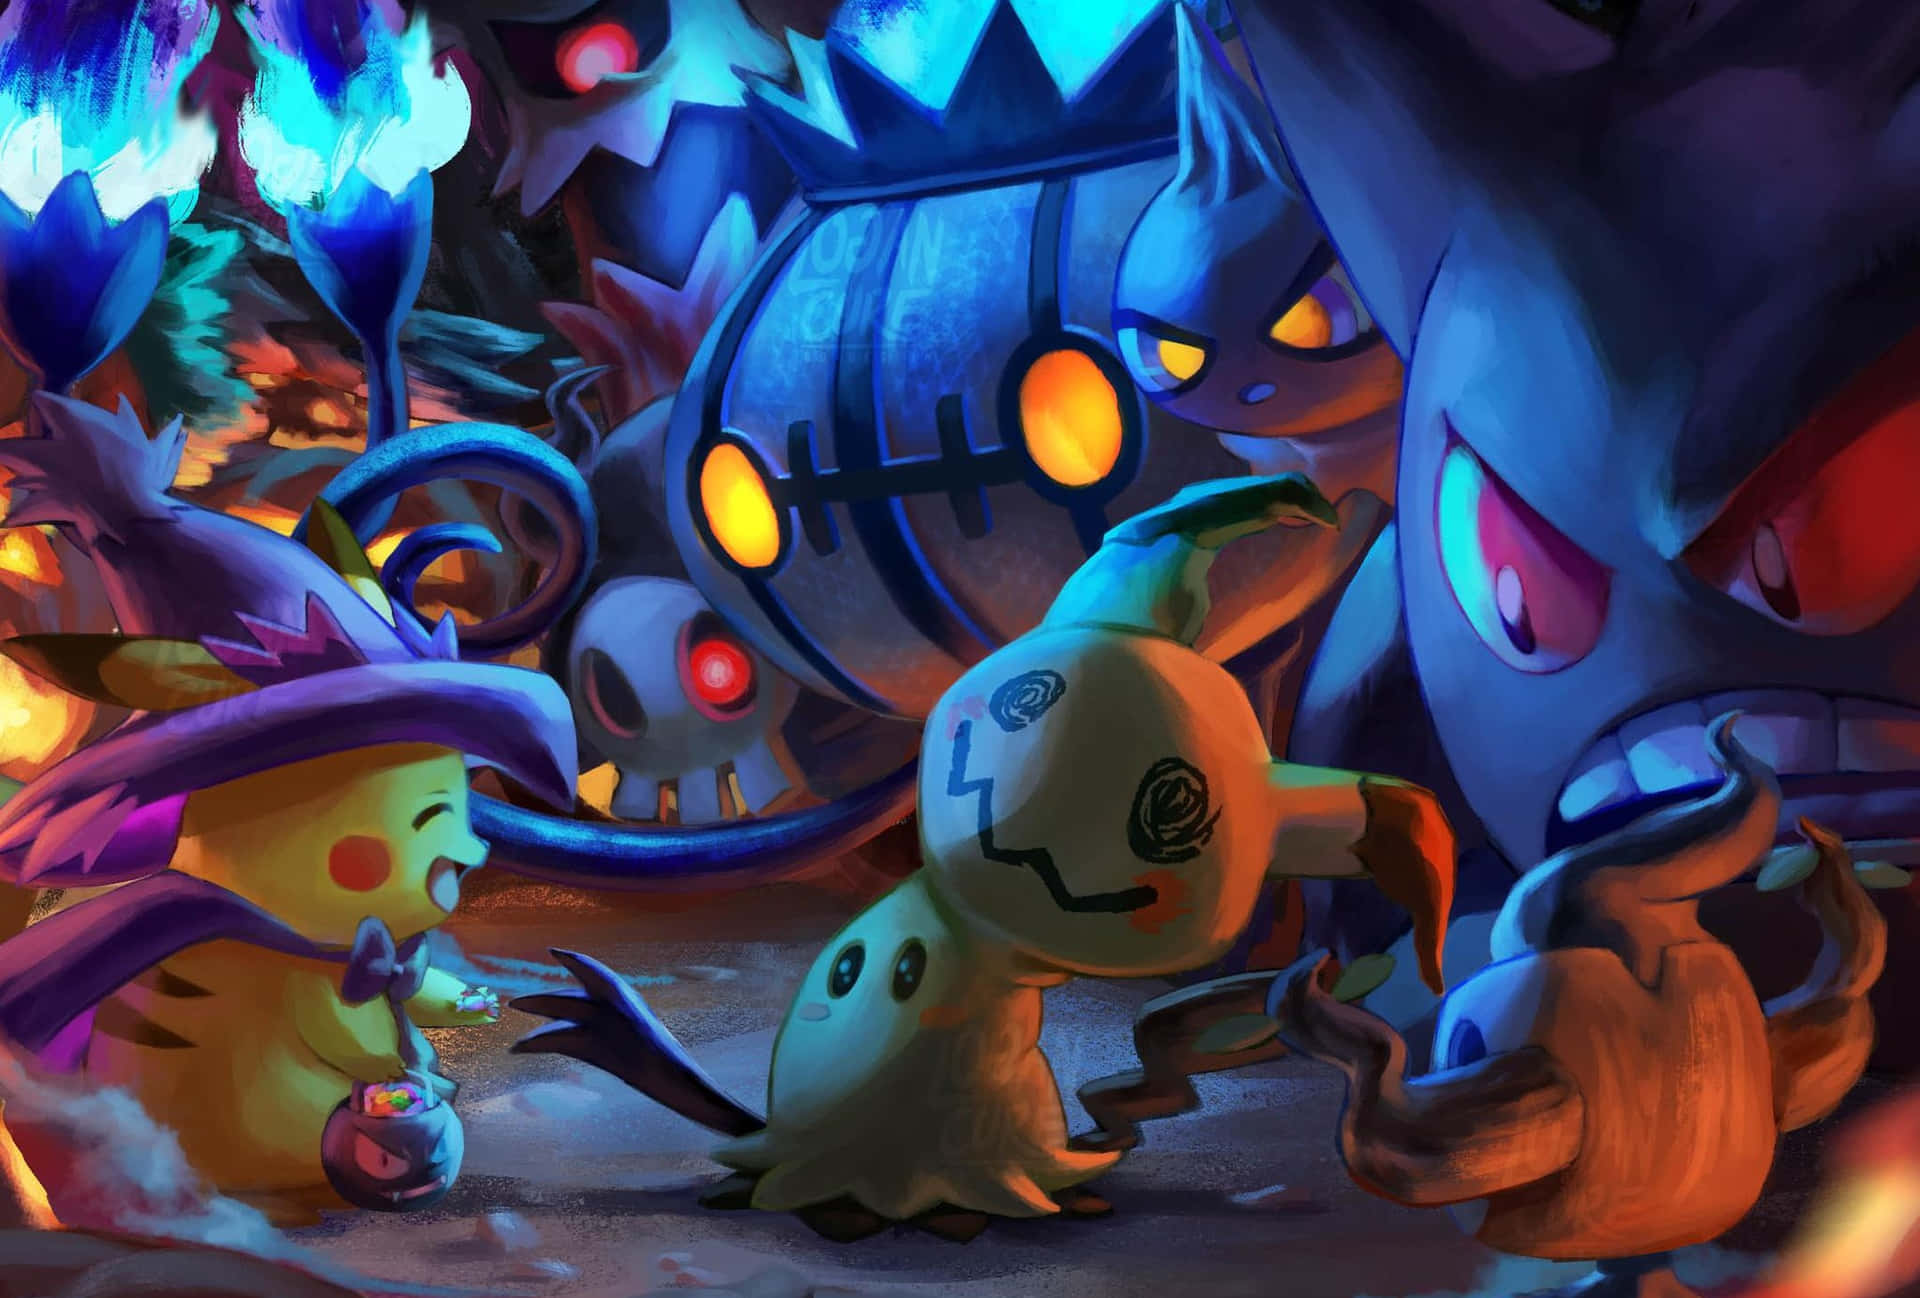 Get in the spooky spirit this Halloween with your favorite Pokemon characters! Wallpaper